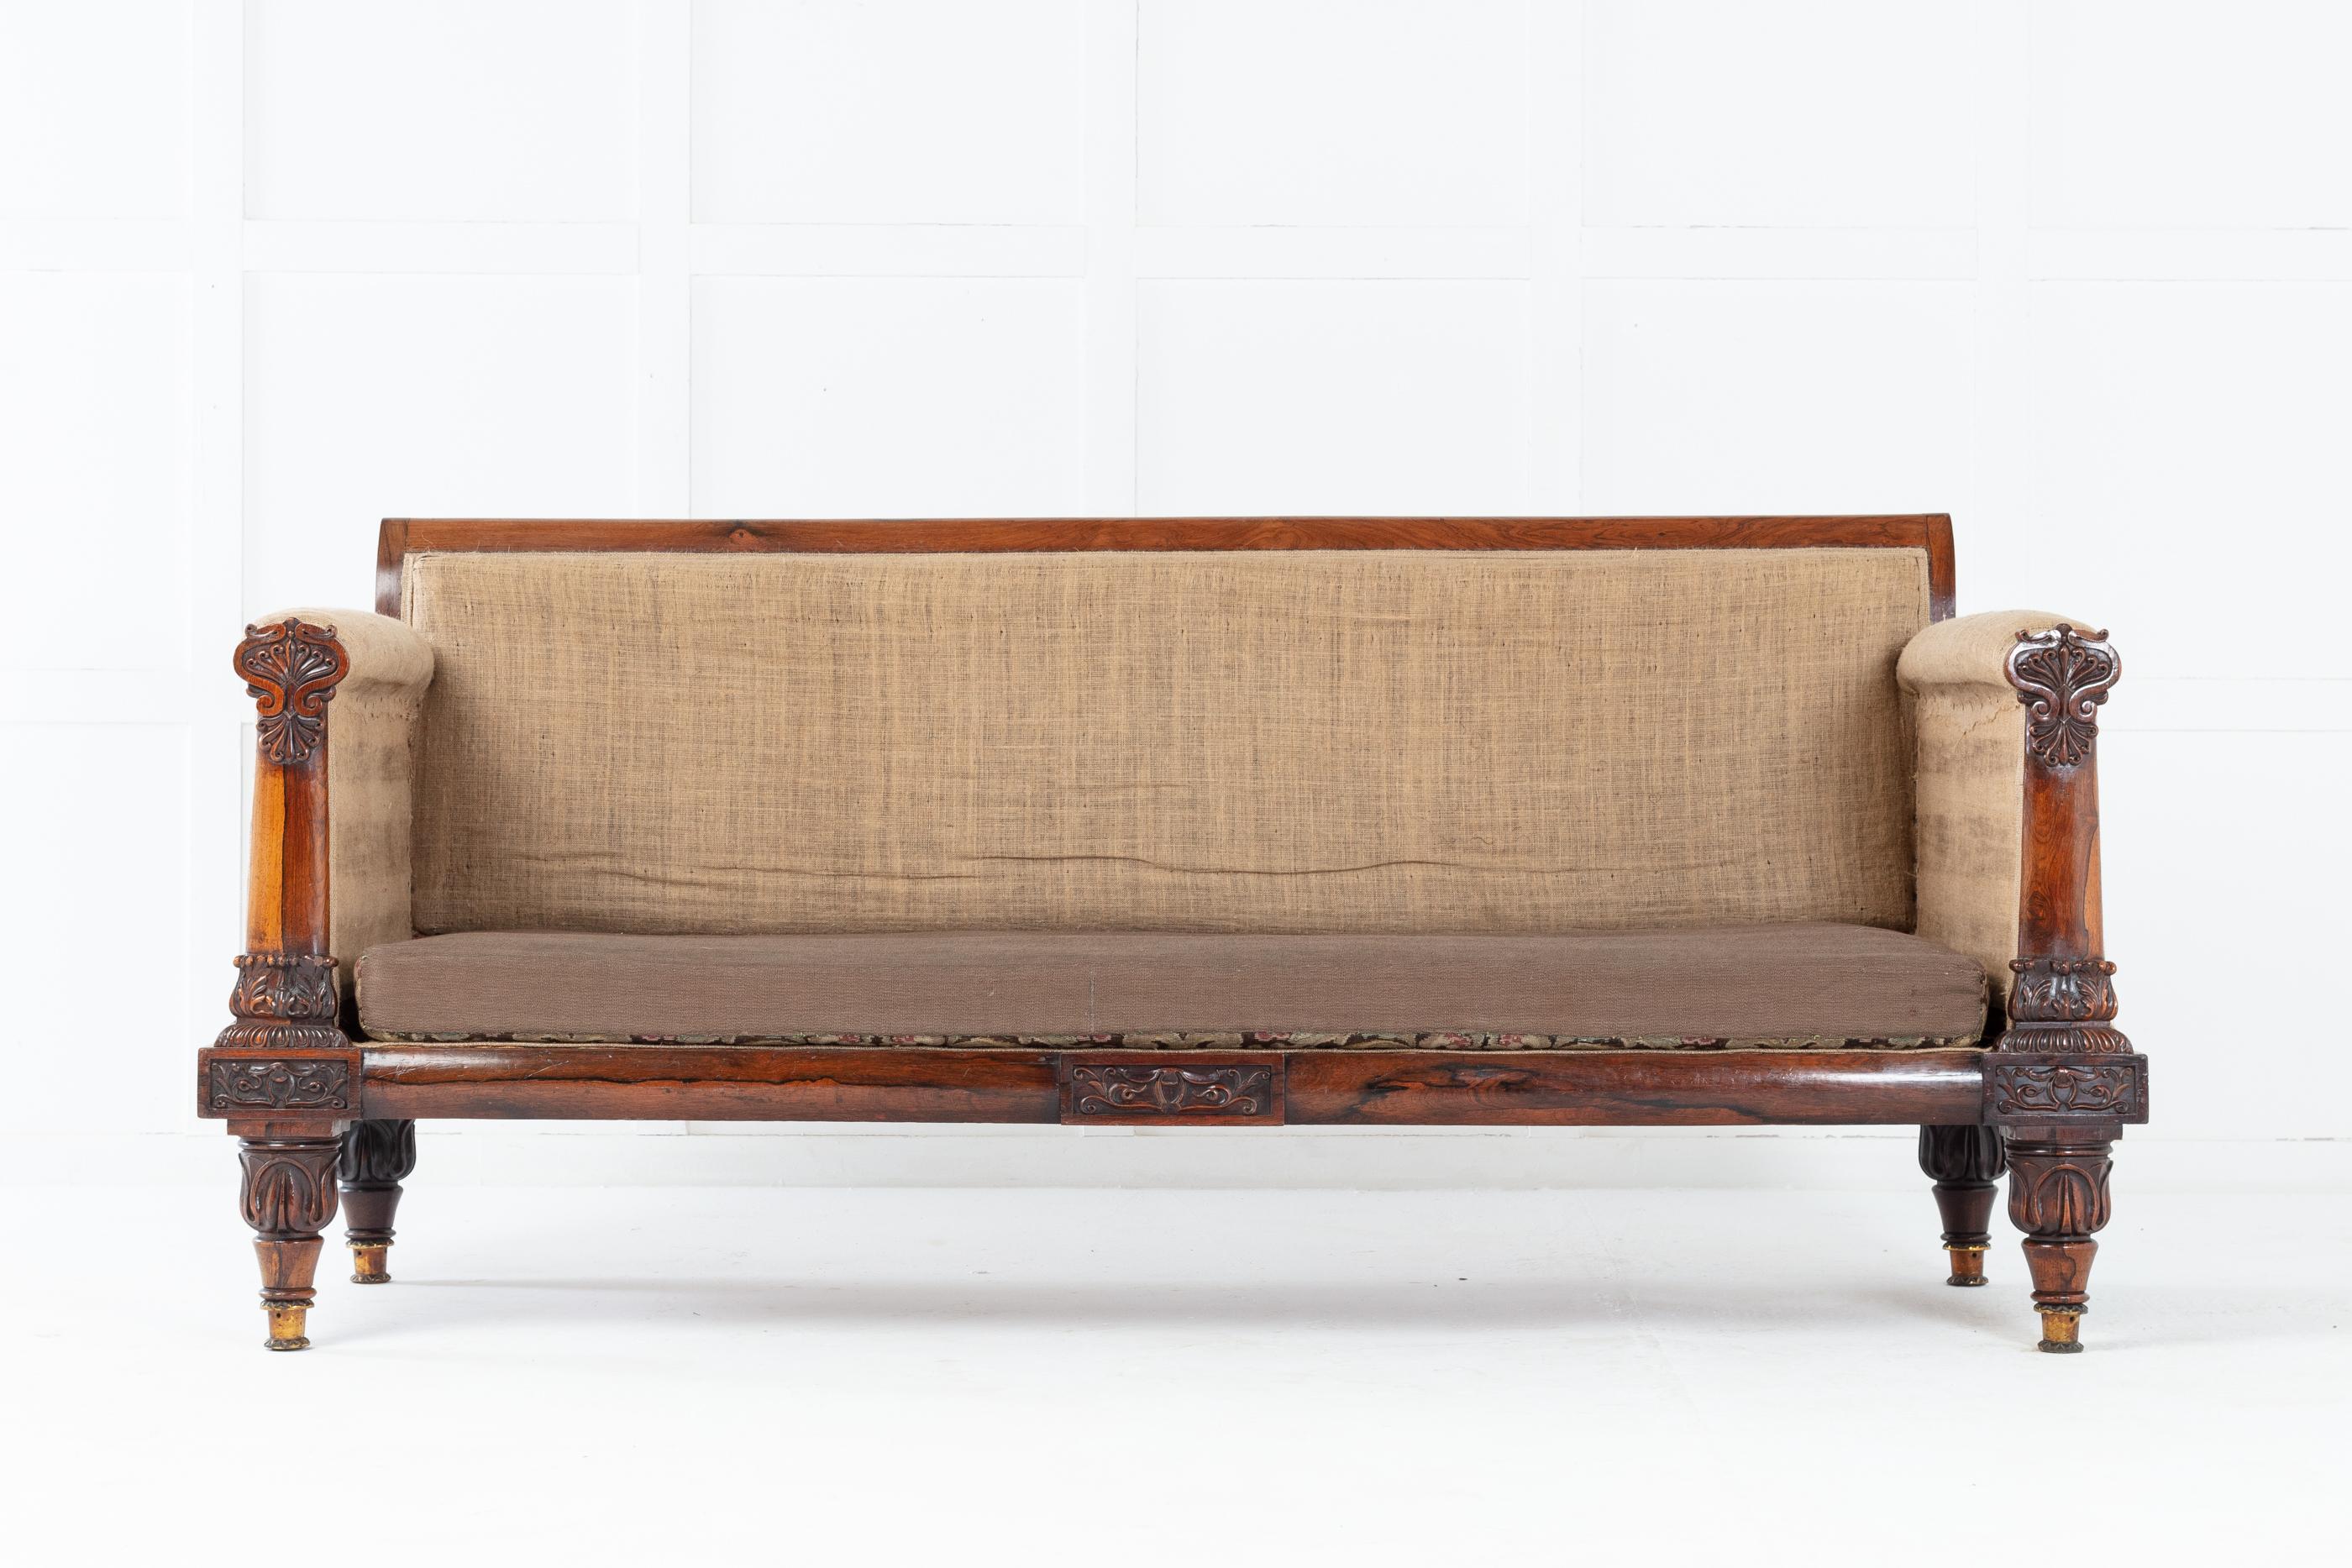 Good scale 19th Regency rosewood sofa. With exceptional carved, bold upright arm supports. The apron has three, rectangular carved rosewood panels. Raised on turned and carved legs with top quality, unusual casters.

This impressive sofa frame has